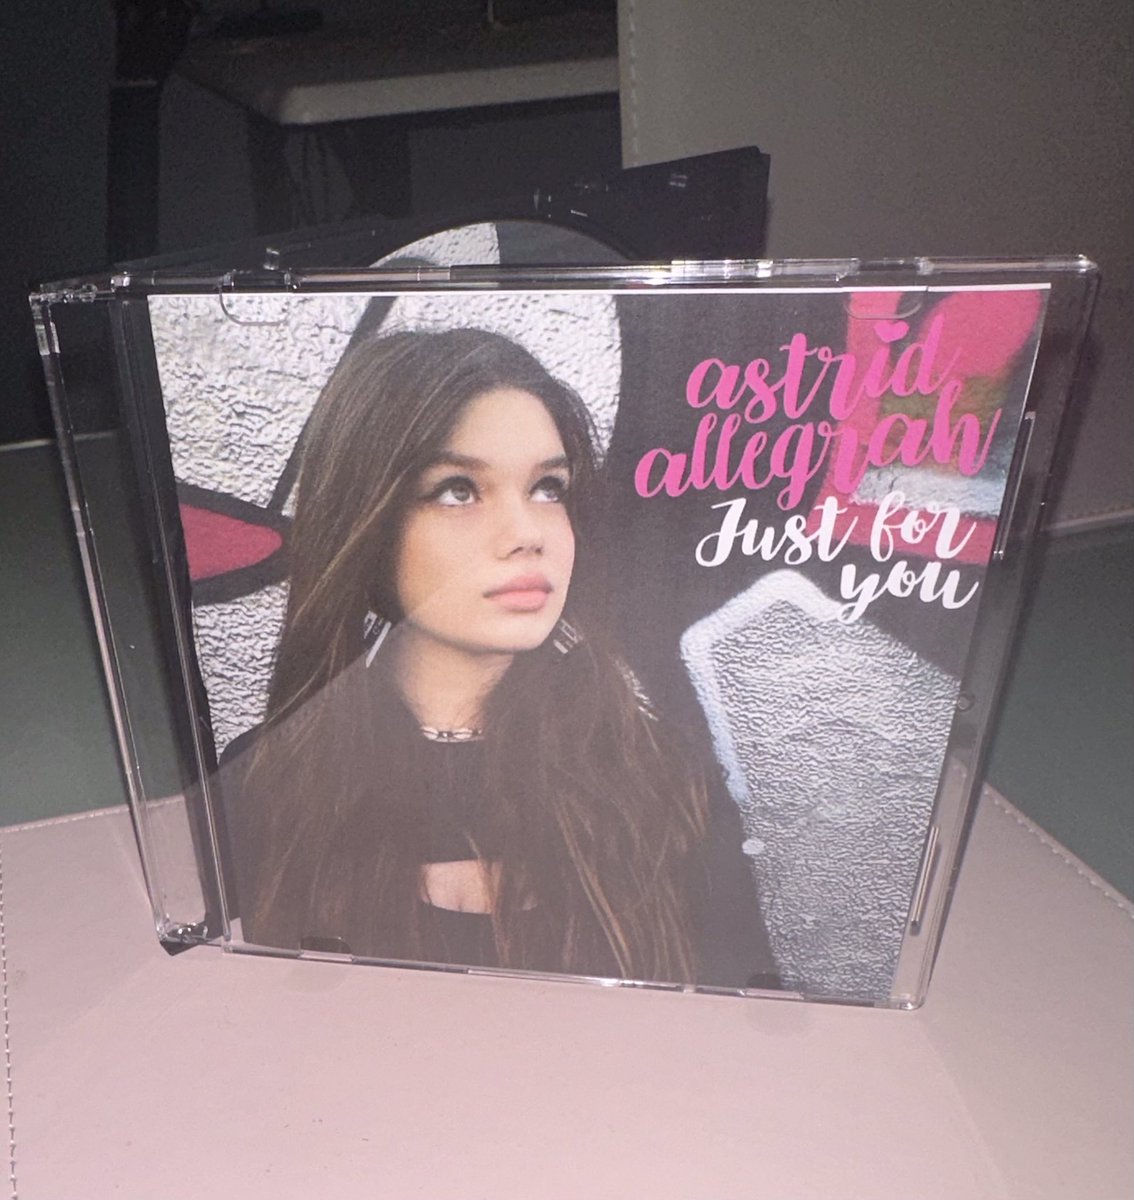 Our CD, Just For You, is officially out today! If you would like a signed copy, with FREE PP, click this link: astridallegrahmusic.co.uk/product/140342…

#newmusicalert #coversongs #FridayFeeling #justforyou #covers #cd #music #Trending